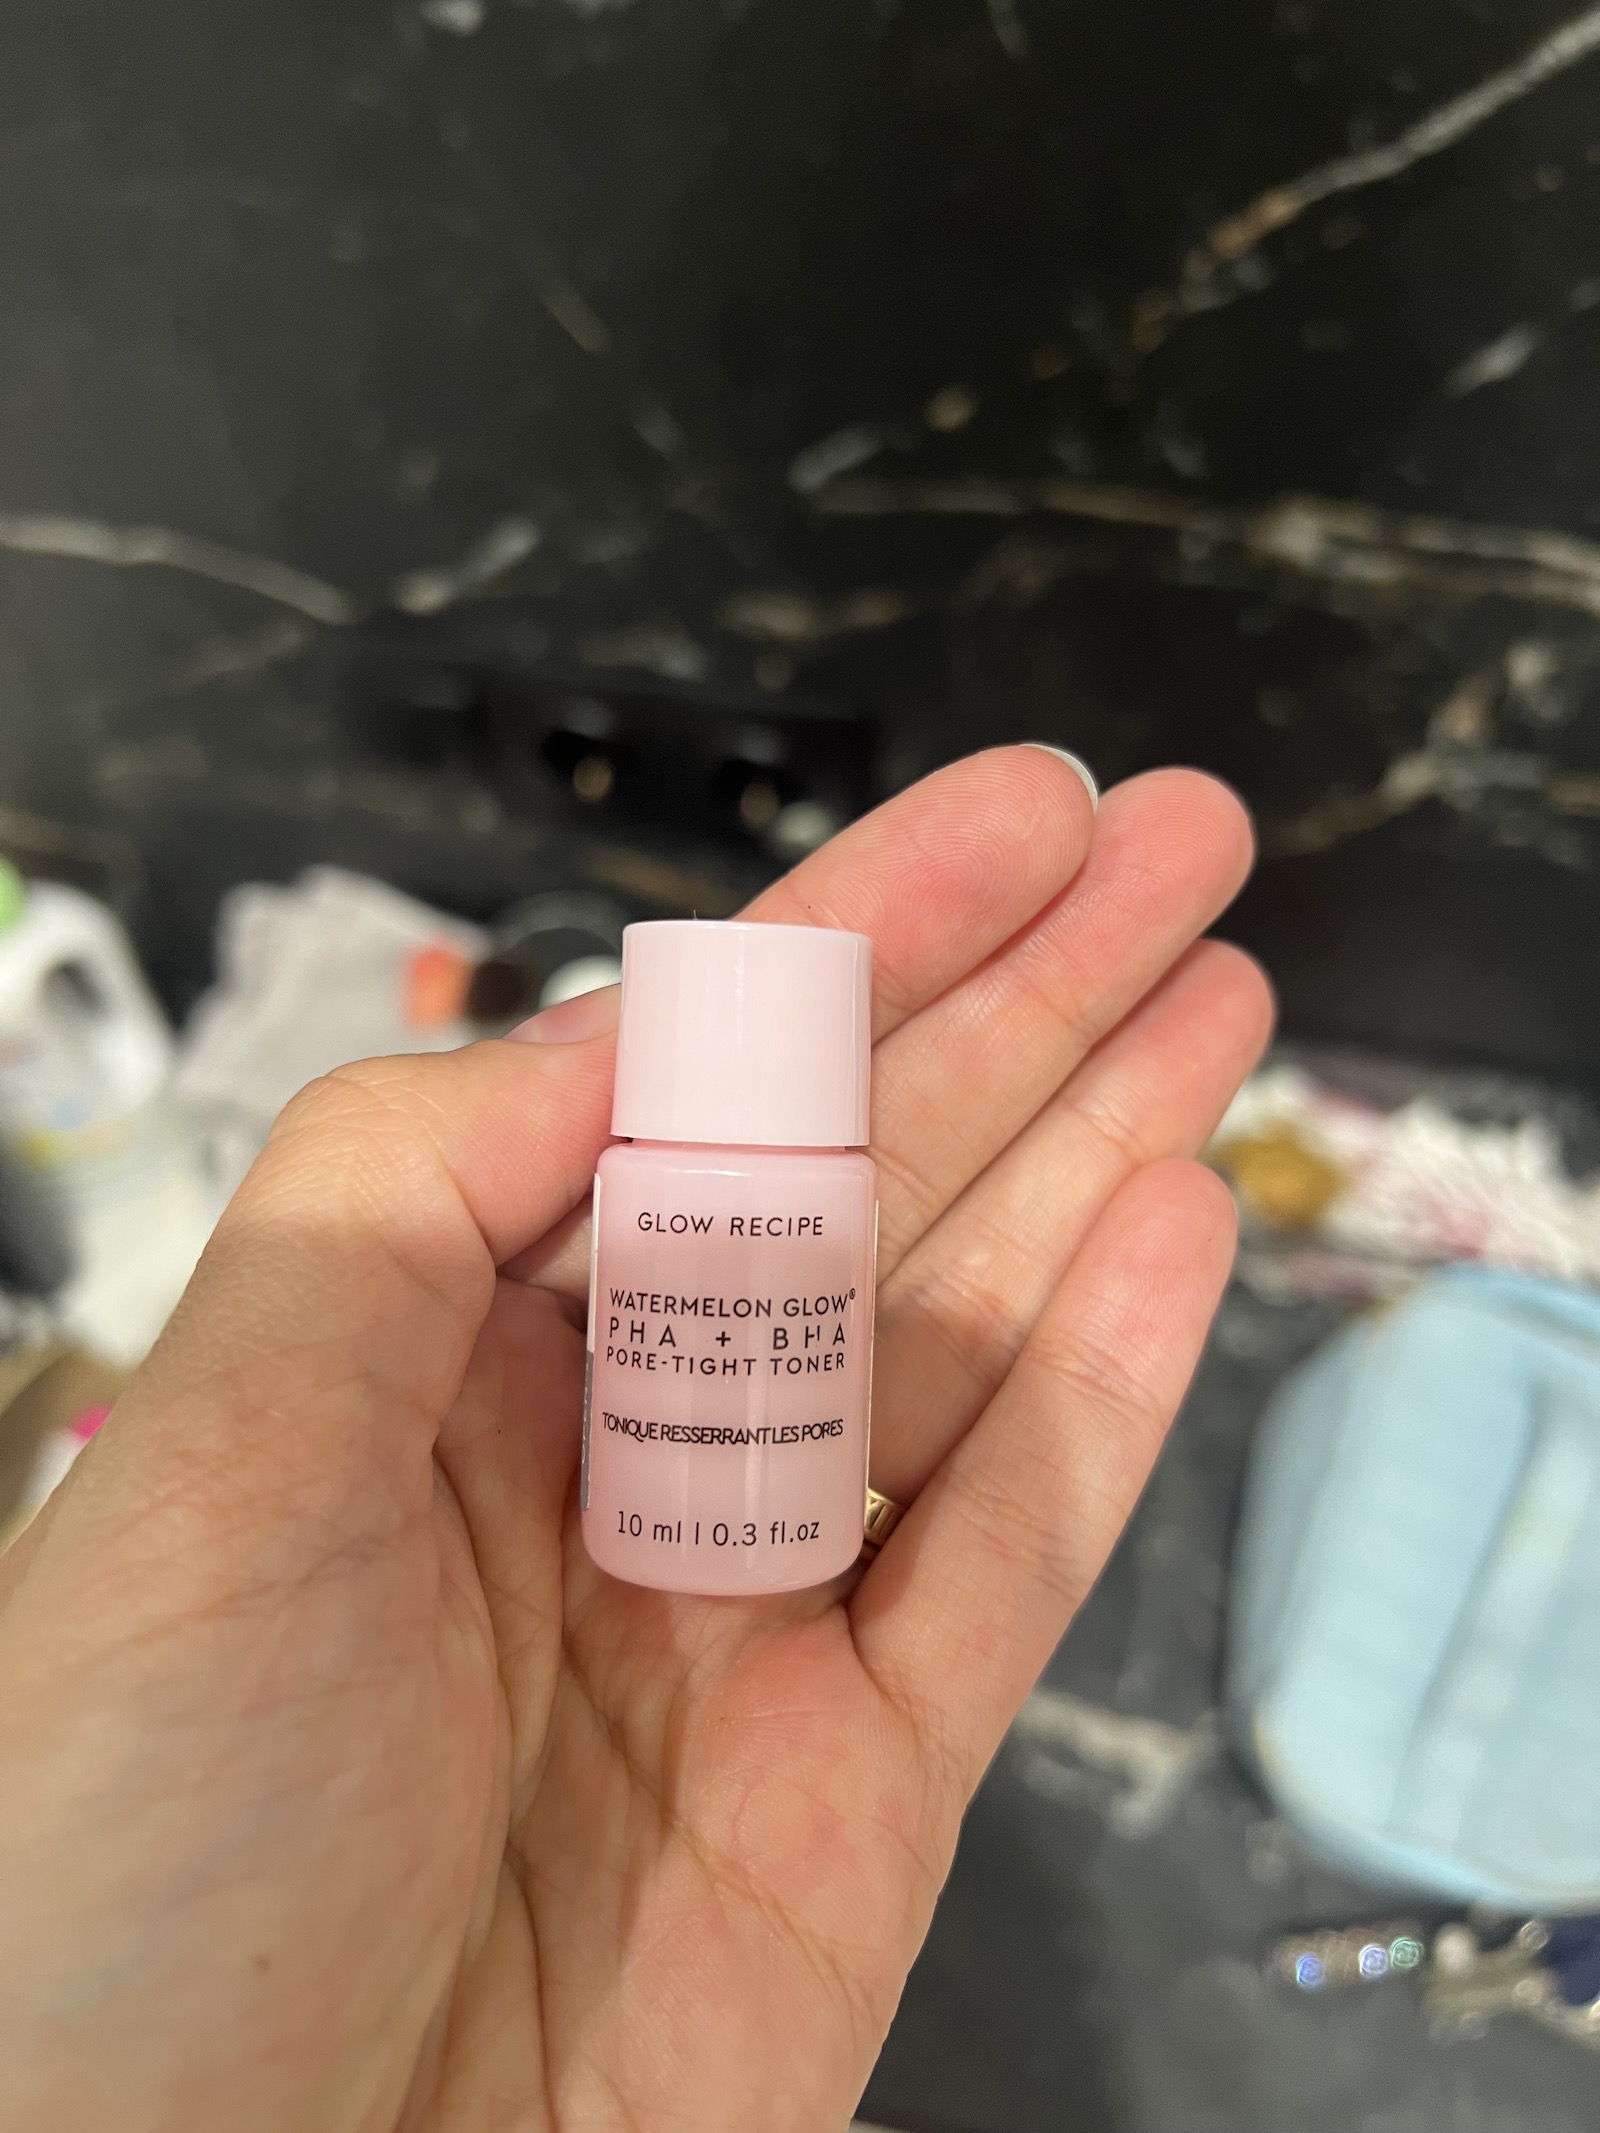 Review: Glow Recipe Watermelon Glow PHA + BHA Face Toner – Worth the Hype